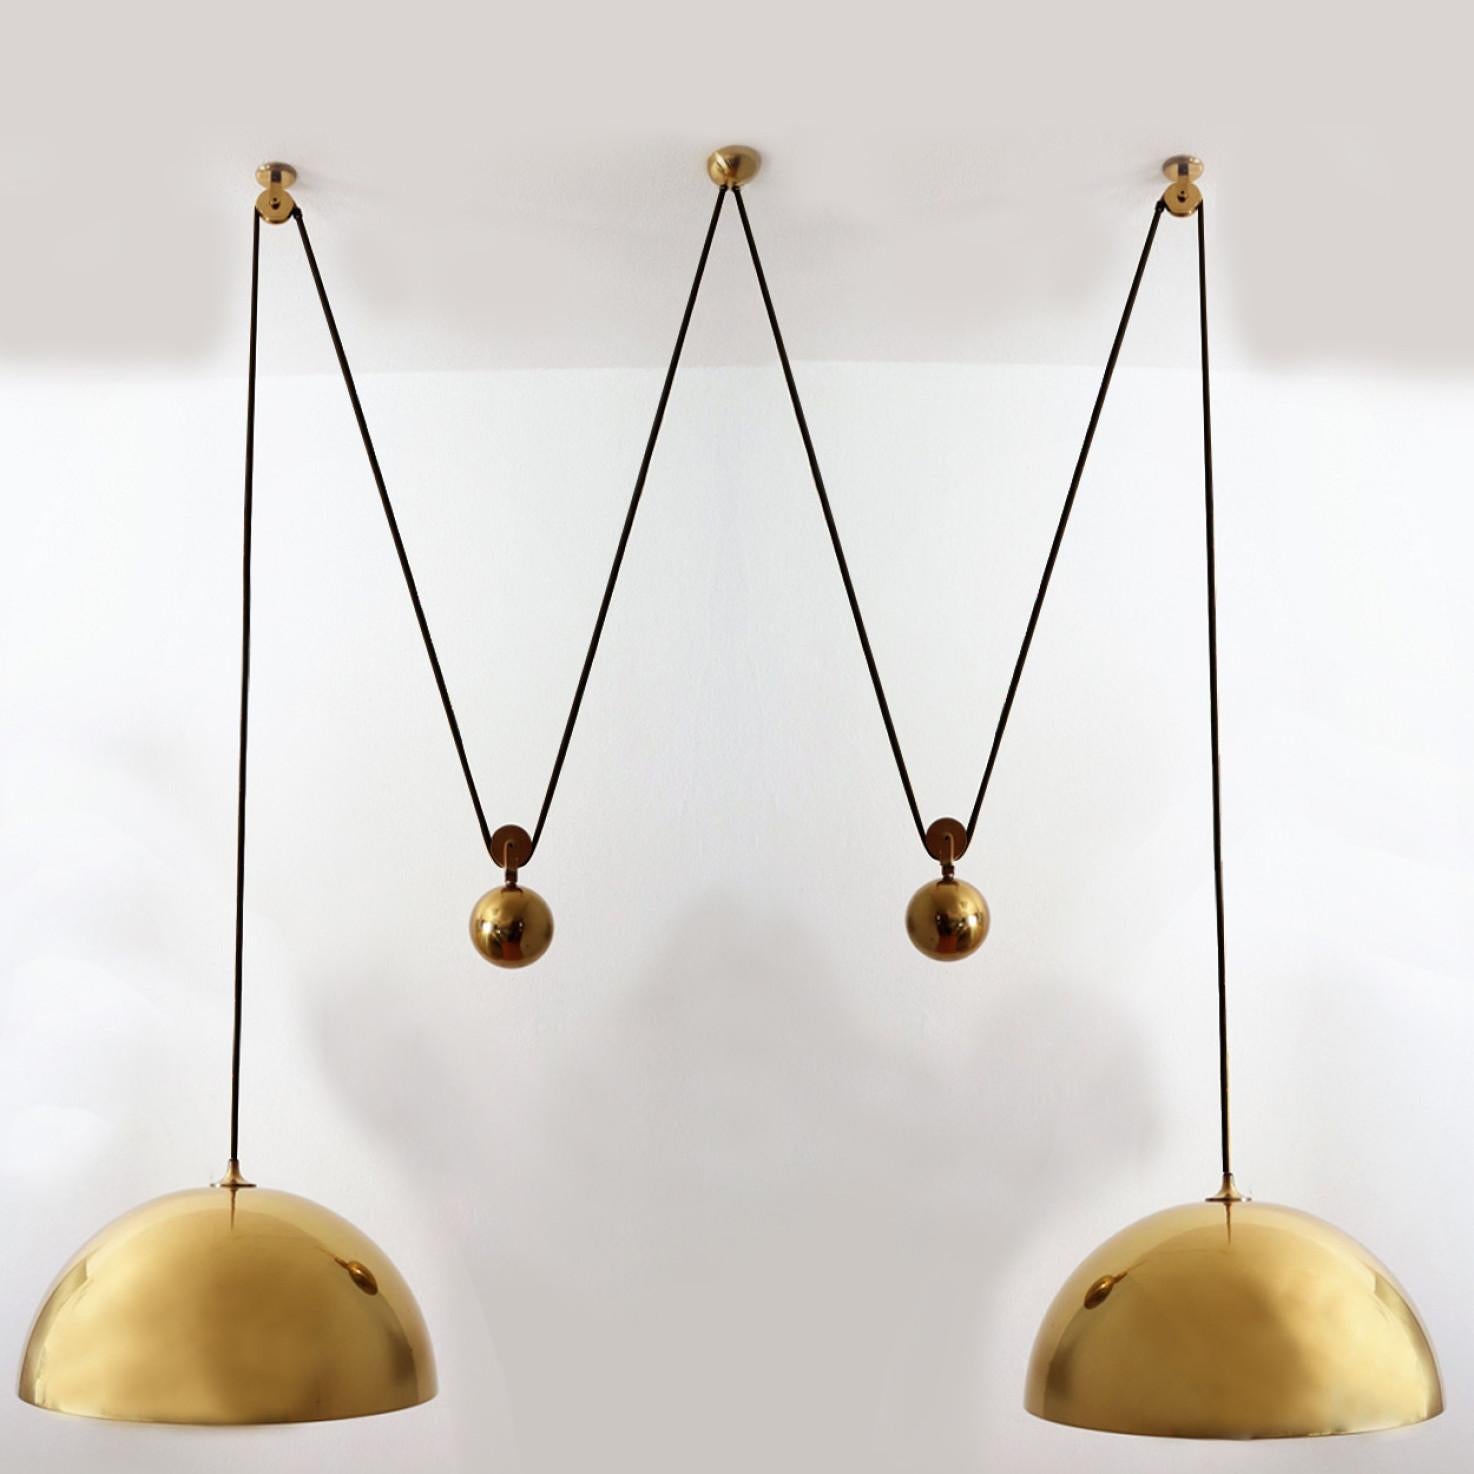 Fantastic Double Pull pendant light by Florian Schulz, Germany, Europe. Design period: 1970-1979, production period: 2022.

Two brass polished unlacquered pendants suspended with their own brass ball counter balance. One canopy supports both